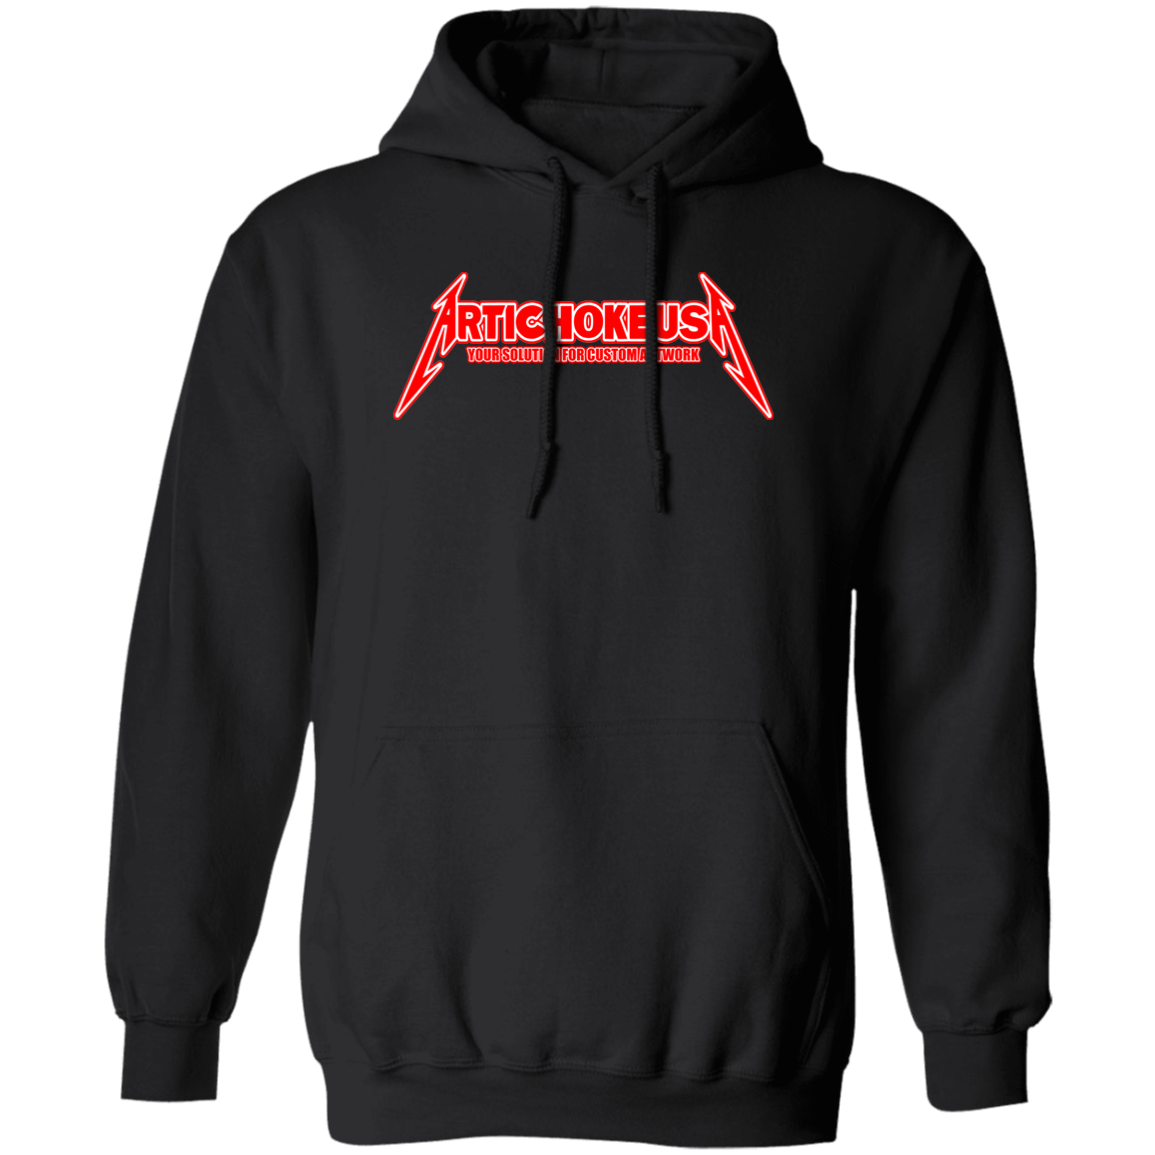 ArtichokeUSA Custom Design. Metallica Style Logo. Let's Make One For Your Project. Basic Pullover Hoodie